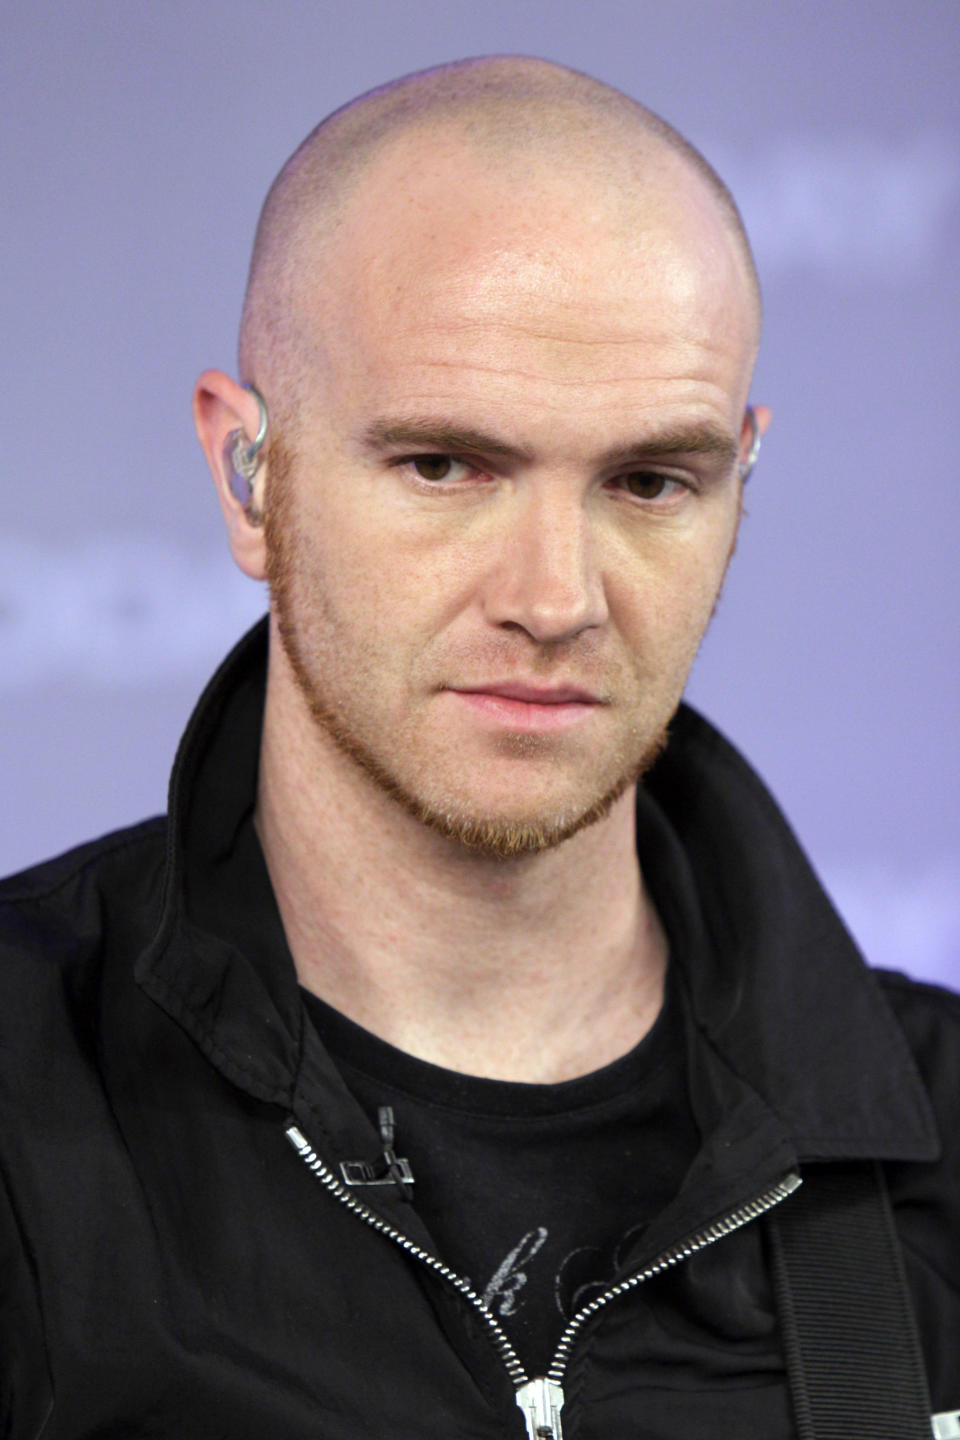 FILE - Mark Sheehan, of the Irish band The Script, appears on the NBC "Today" television program in New York Monday, July 20, 2009. Ireland’s president has led tributes to Mark Sheehan, guitarist with Irish rock band The Script, after his death at the age of 46. The band said Sheehan died in a hospital on Friday, April 14, 2023, after a brief illness. In a statement, The Script called him a “much loved husband, father, brother, band mate and friend.” (AP Photo/Richard Drew, File)